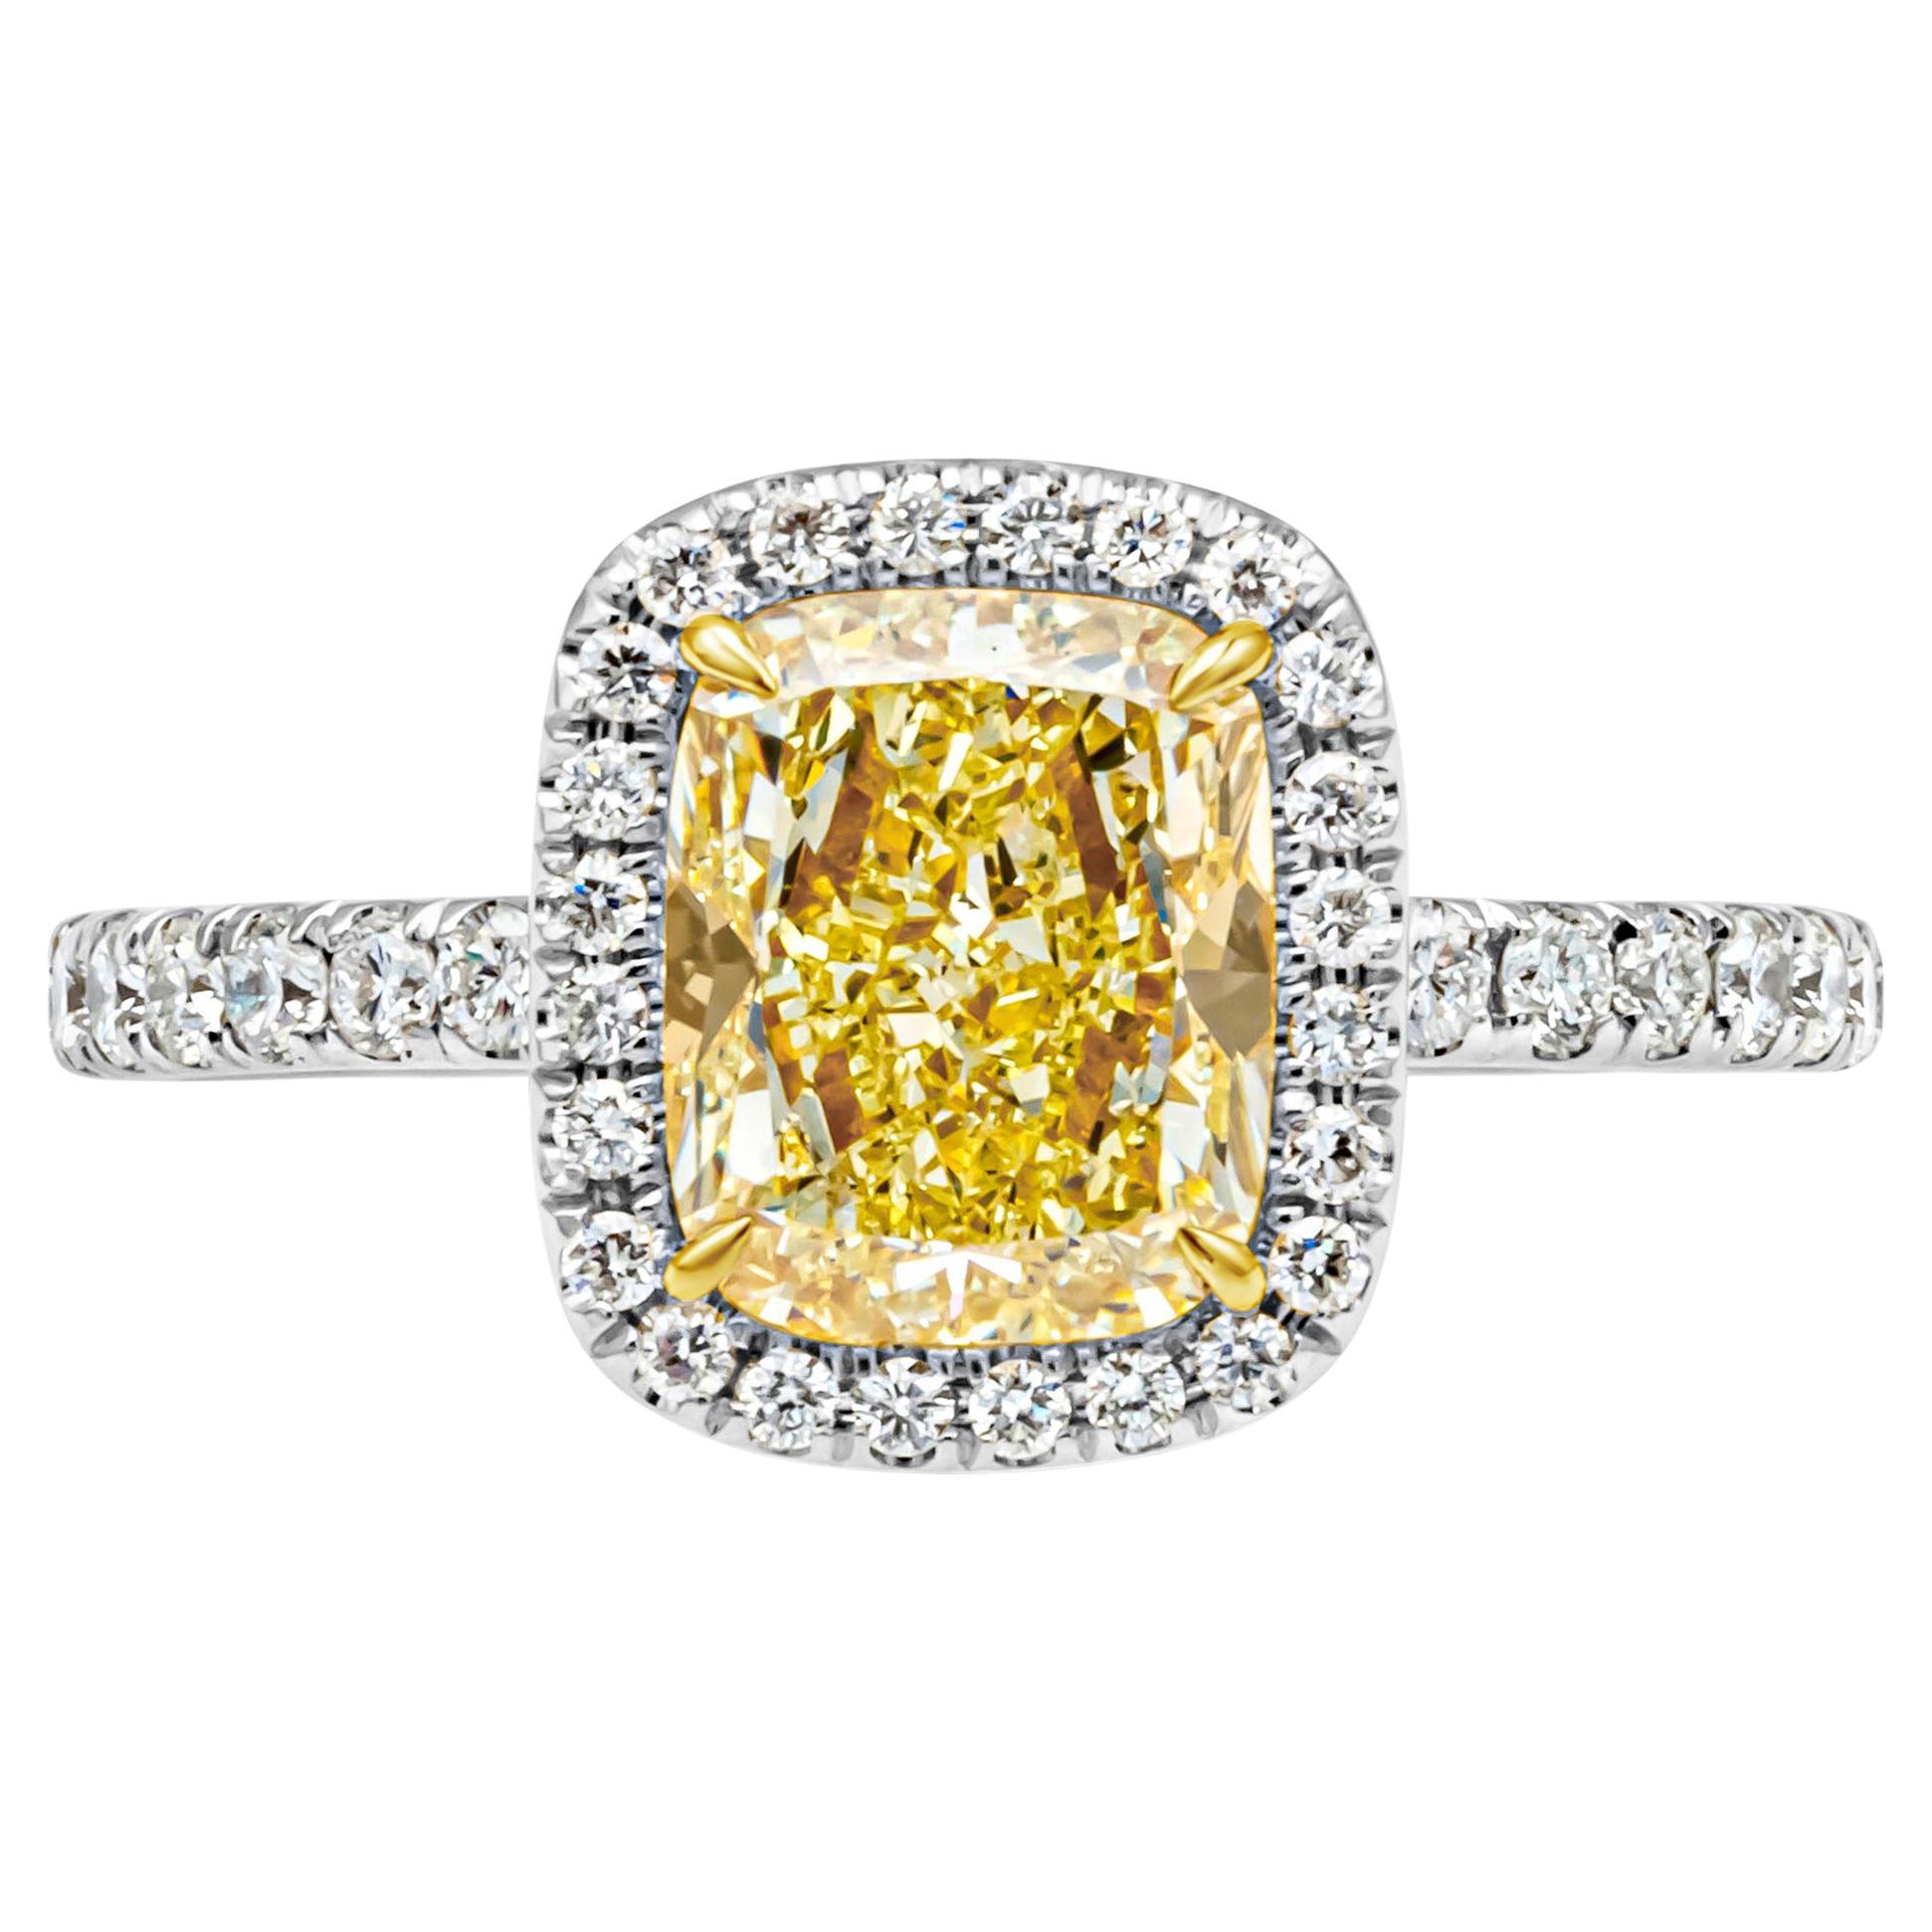 GIA Certified 2.03 Carats Cushion Cut Fancy Yellow Diamond Halo Engagement Ring For Sale